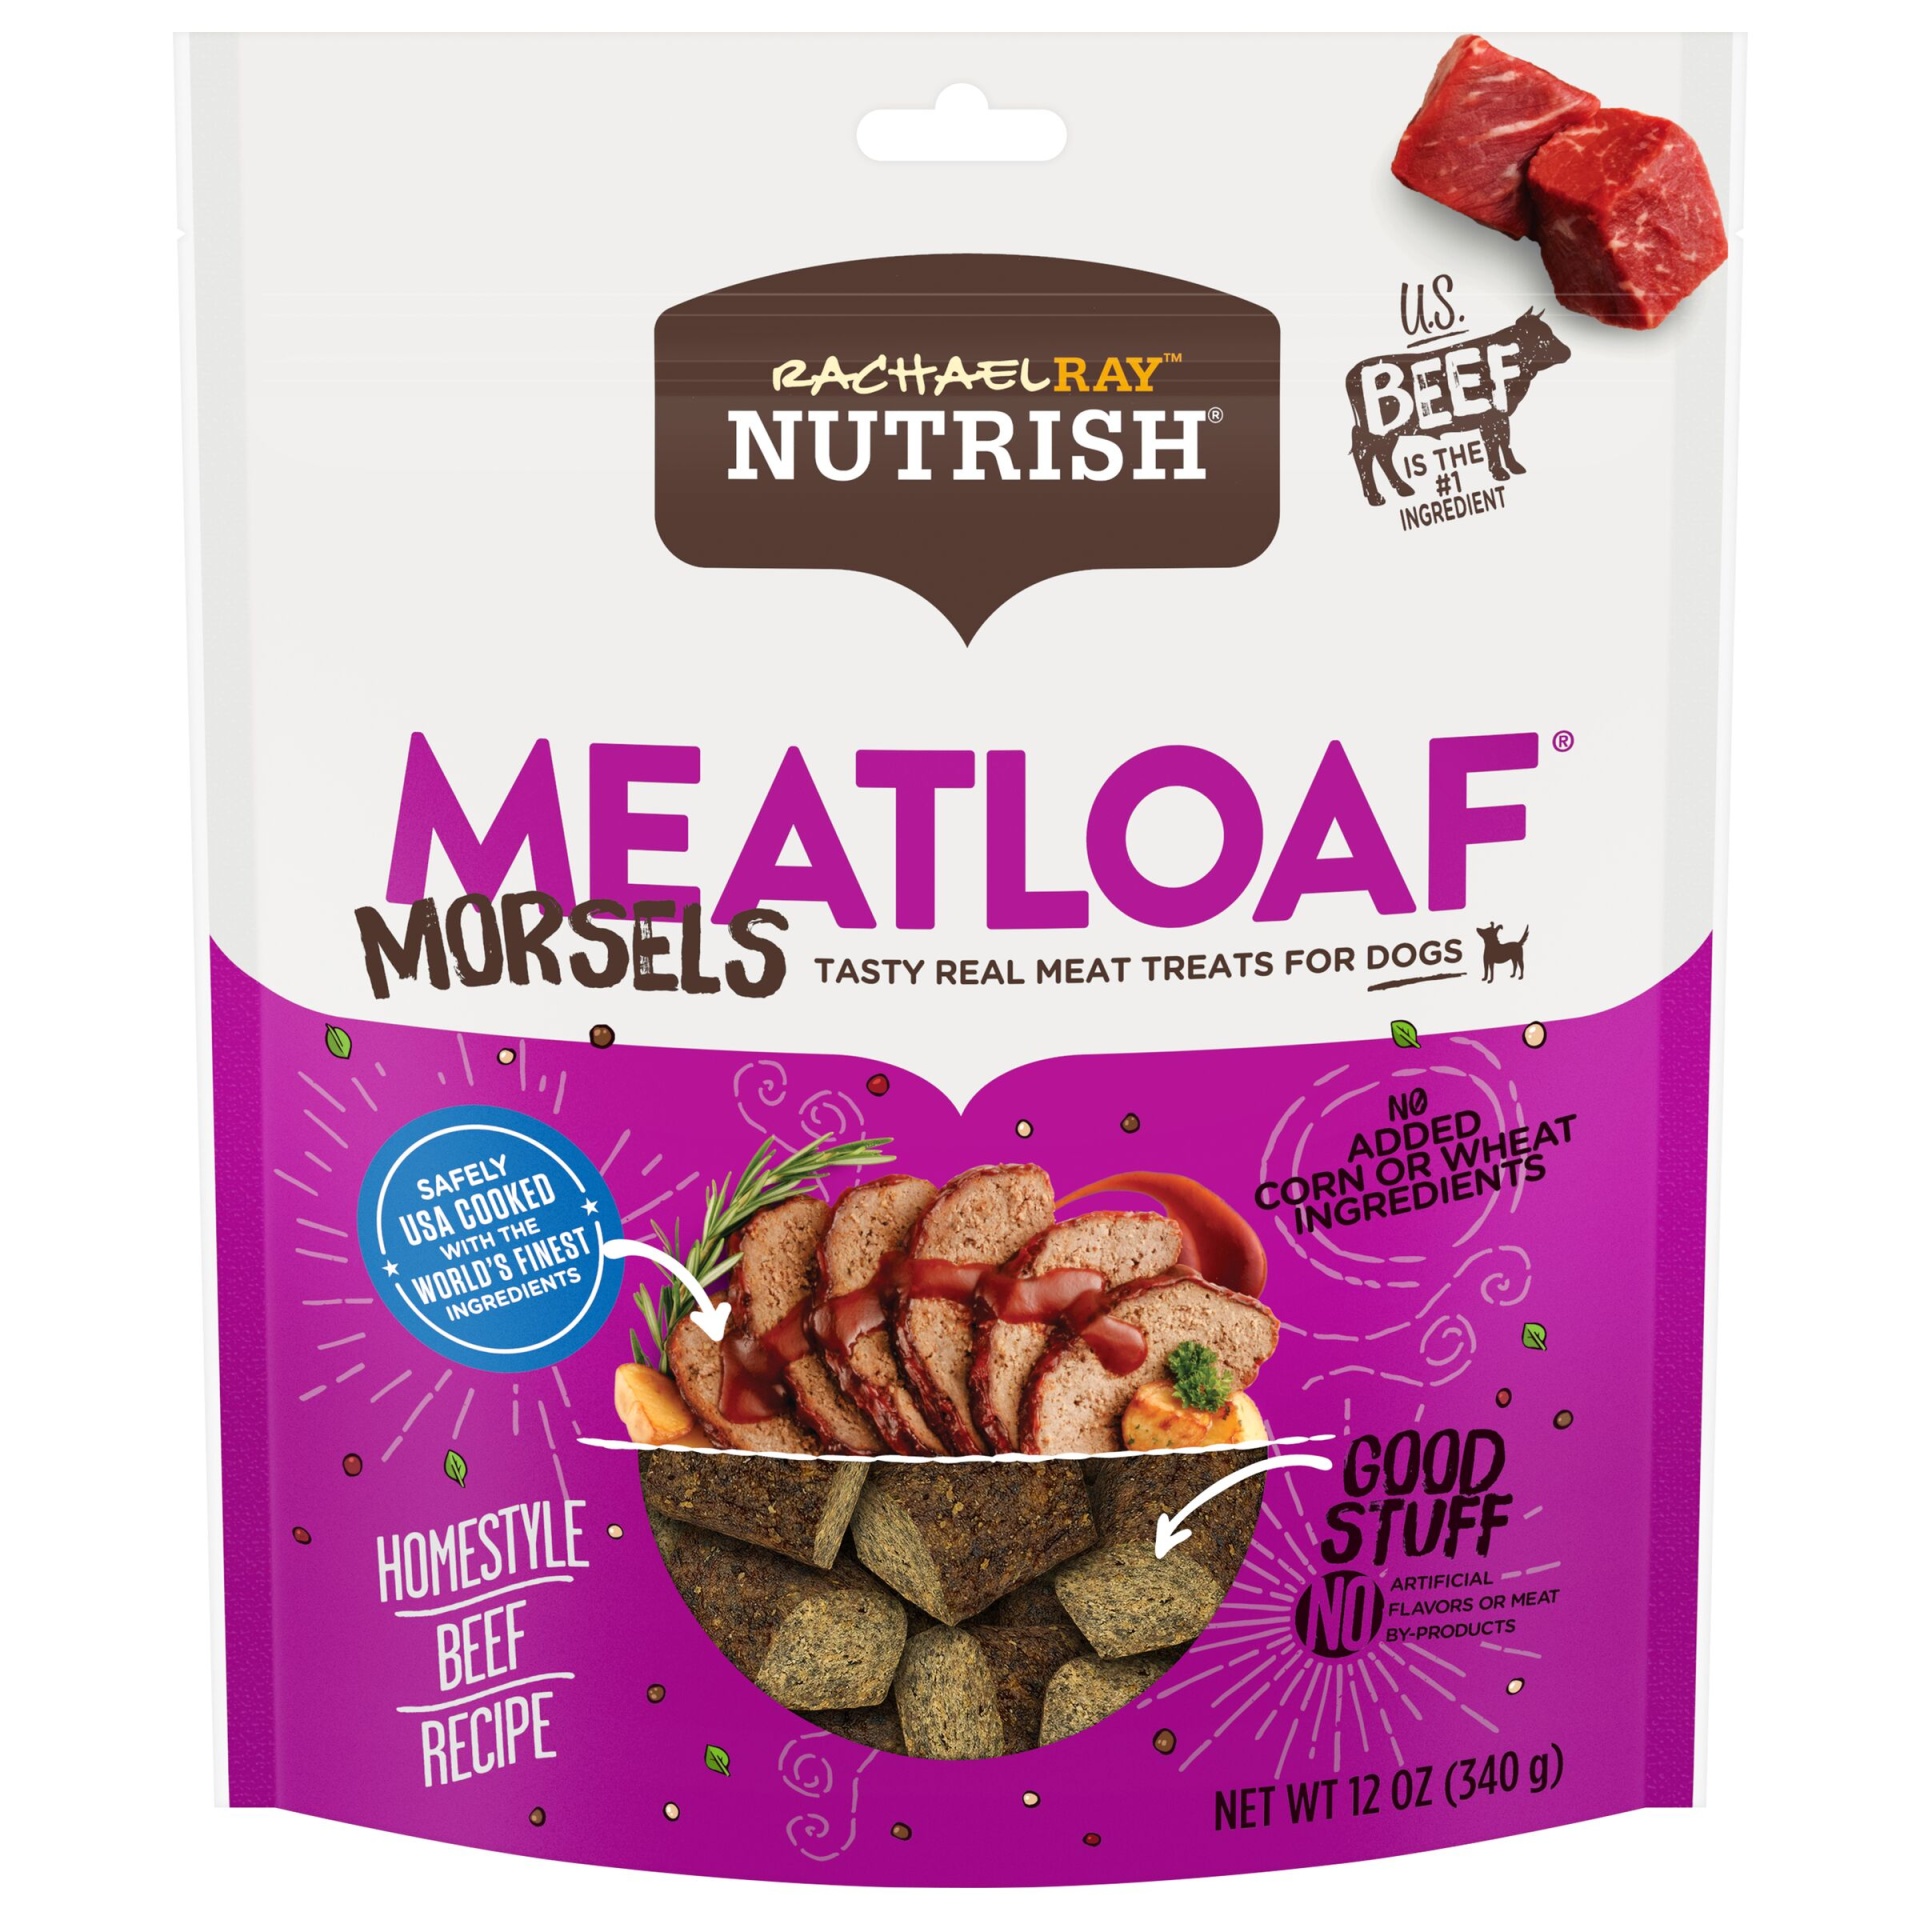 slide 1 of 5, Rachael Ray Nutrish Meatloaf Morsels Dog Treats, Homestyle Beef Recipe, 12 oz